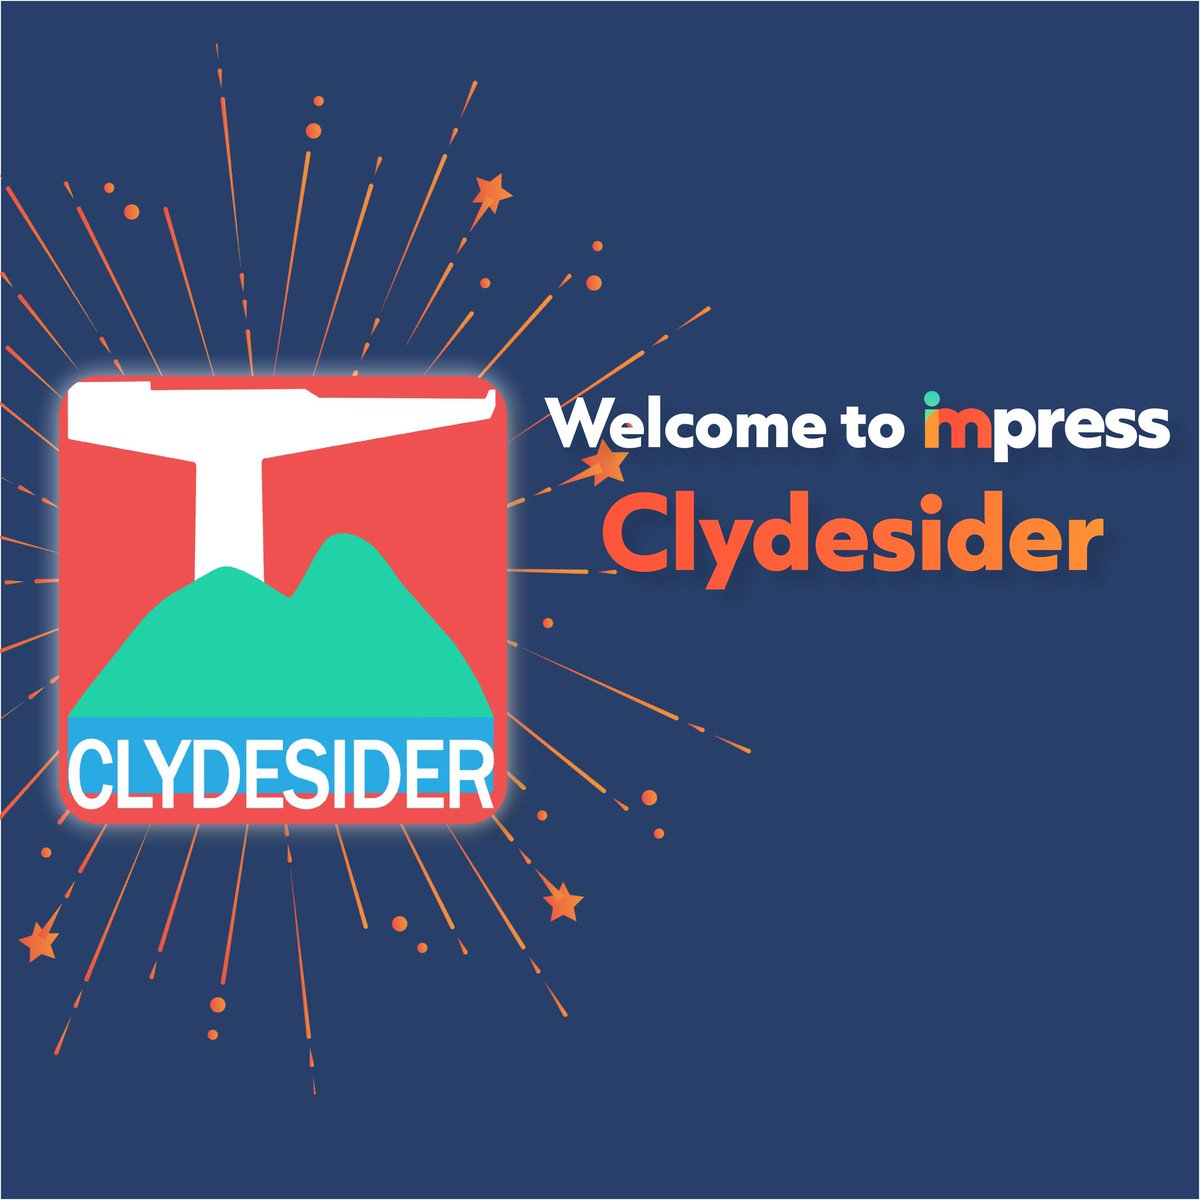 Welcome to Impress, @ClydesiderMag! 🥳 Covering West Dumbartonshire, the solution-focused publication is the latest to take up truly independent press regulation 👏 #NewMemberMonday